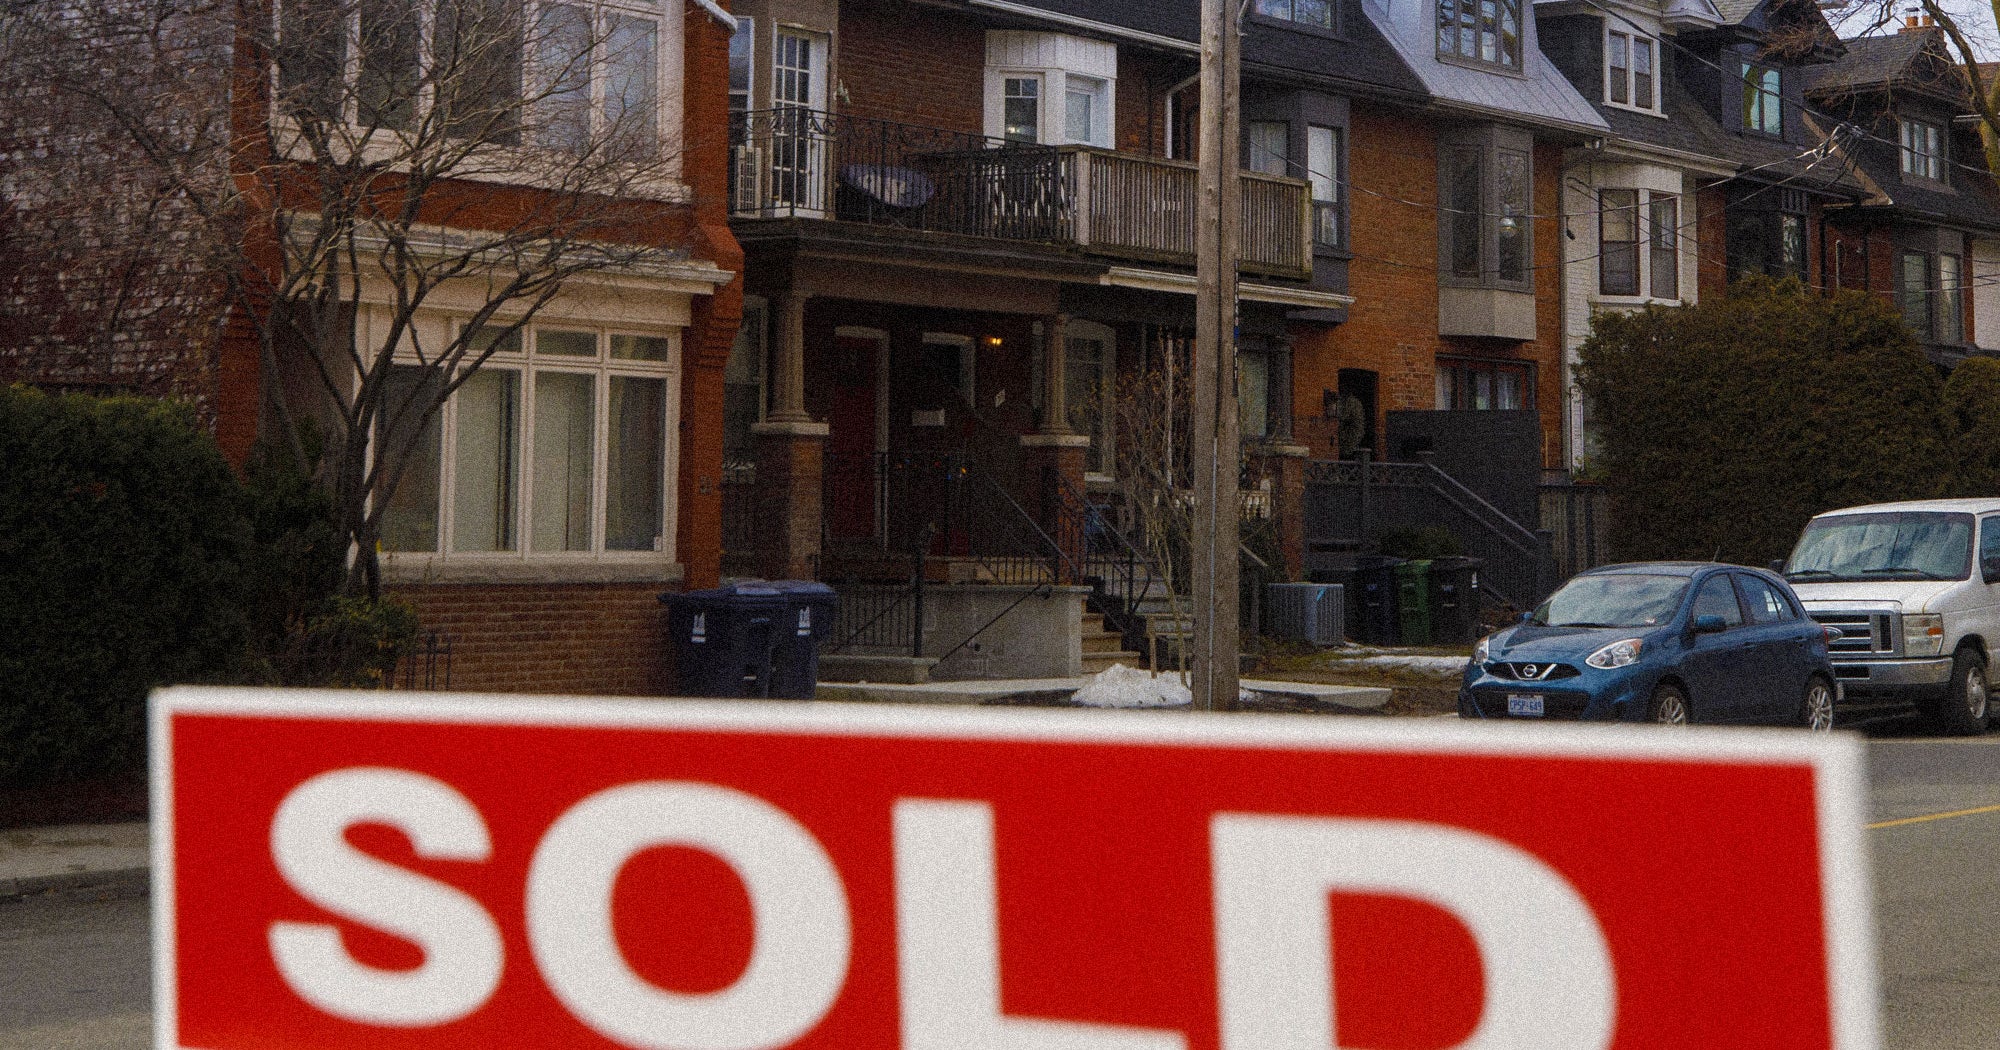 Canada Real Estate Agents On Whether Market Will Crash